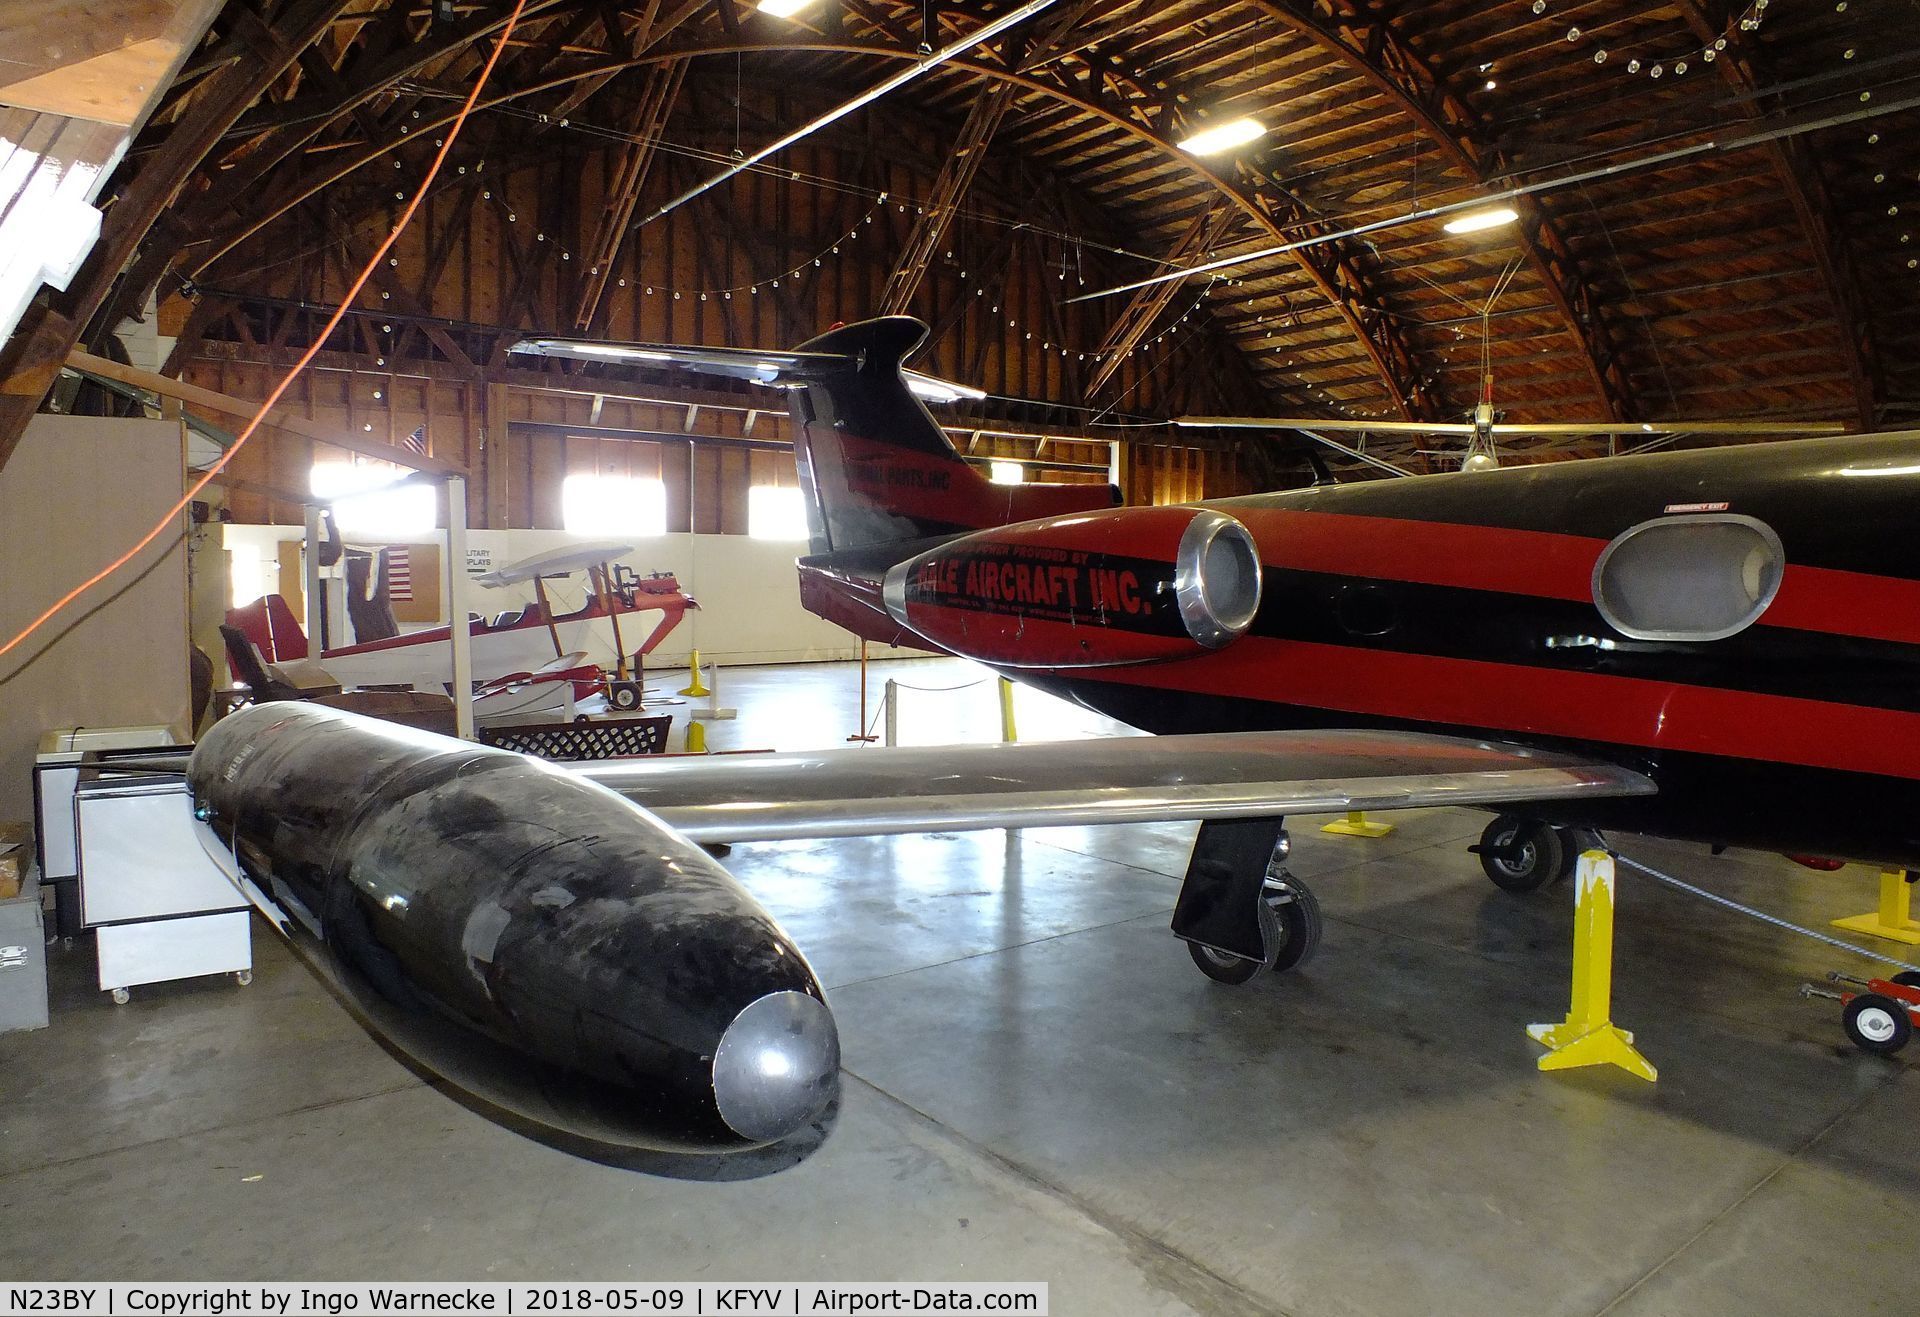 N23BY, 1965 Learjet 23 C/N 23-009, Learjet 23 at the Arkansas Air & Military Museum, Fayetteville AR